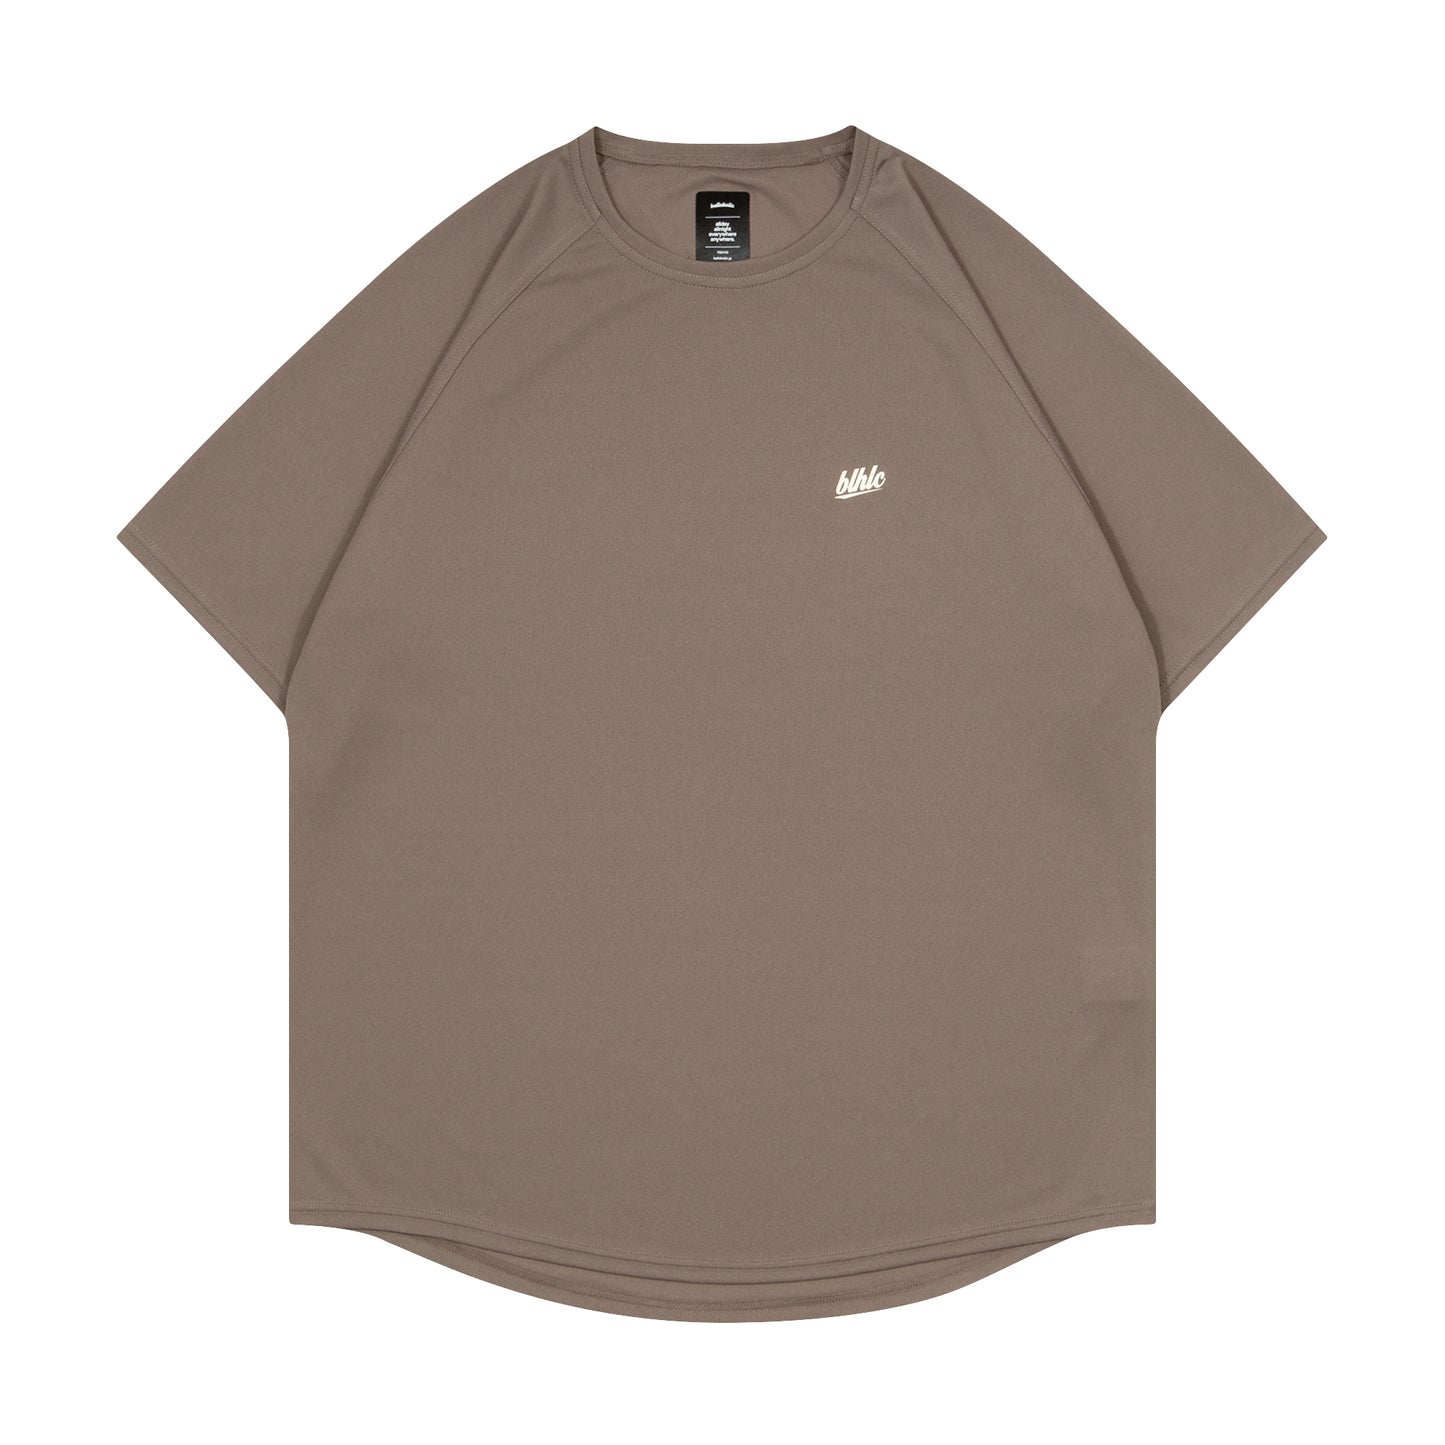 blhlc Cool Tee (taupe gray/off white)